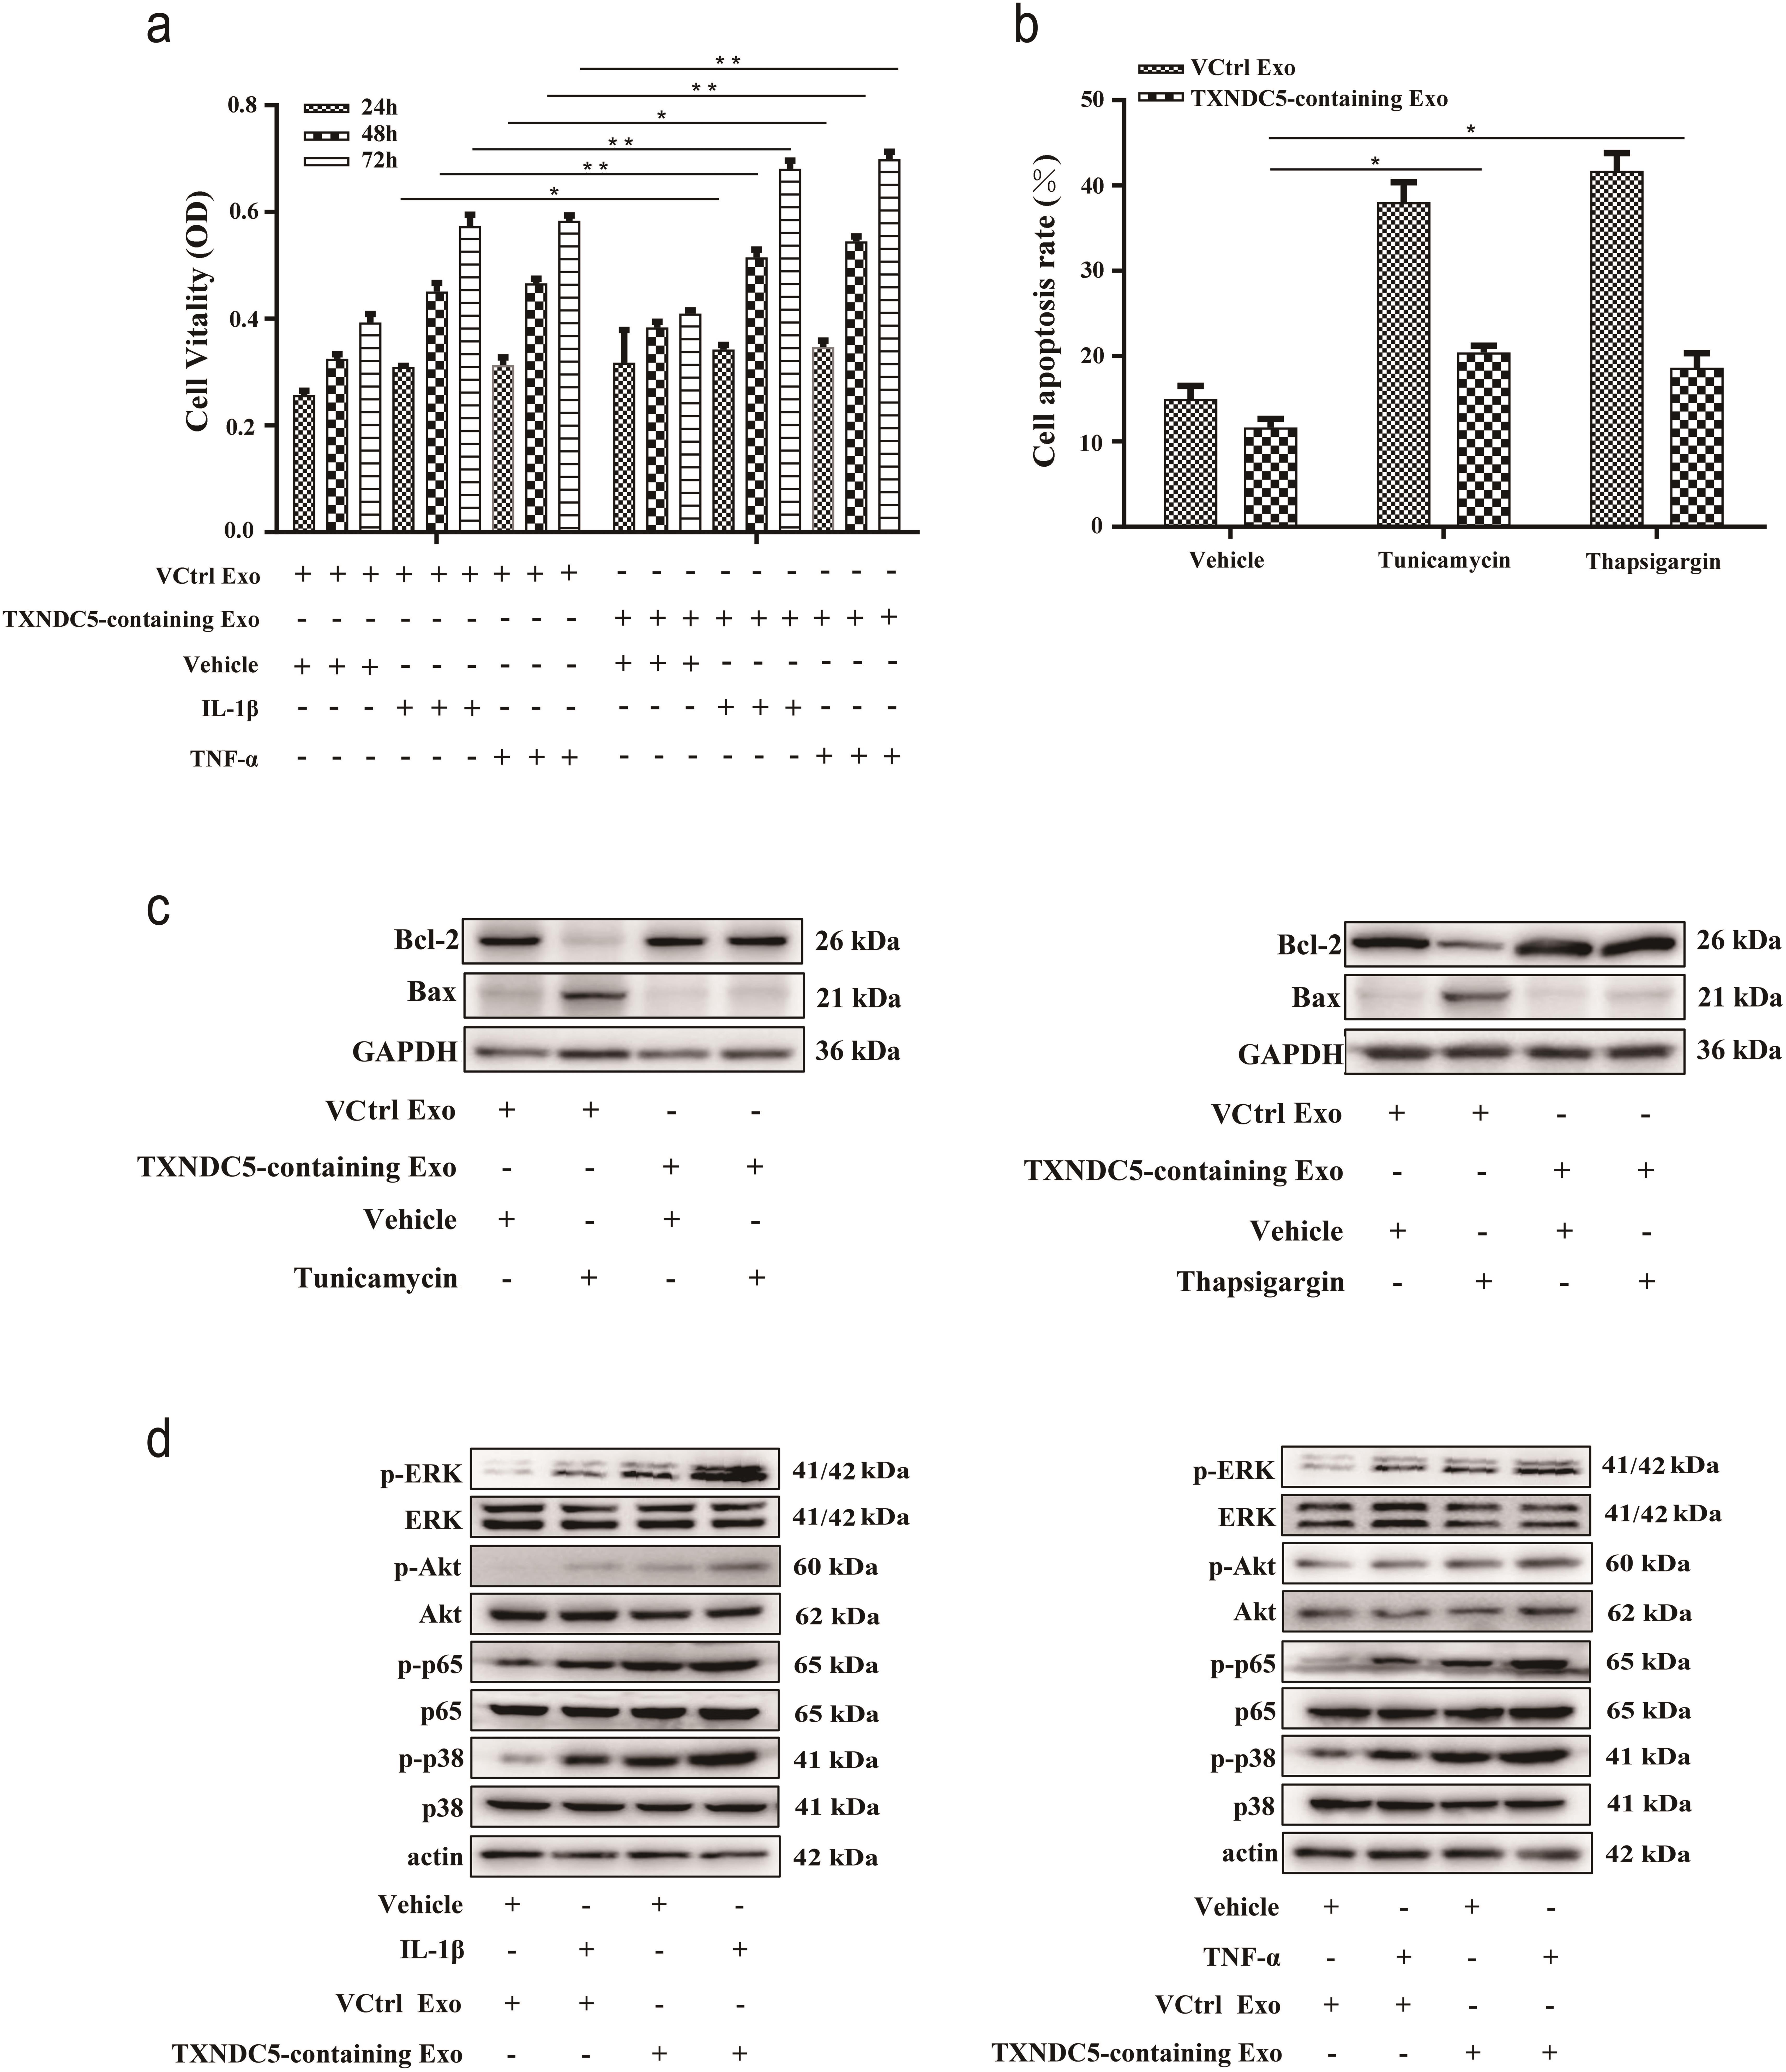 TXNDC5-derived exosomes increase the viability of RA FLSs and protect RA FLSs against ER stress-induced apoptosis: (a) cell viability of RA FLSs was measured after pretreated RA FLSs with TXNDC5 or VCtrl that expressed RA FLSs-derived exosomes in normal (vehicle) or inflammation-stimulating environment (treated with IL-1β or TNF-α); (b) Annexin V staining; and (c) Western blotting were used to detect cell apoptosis after pretreated RA FLSs with TXNDC5 or VCtrl that expressed RA FLSs-derived exosomes, followed by thapsigargin or tunicamycin treatment; and (d) effect of exosomes derived from TXNDC5 overexpressed RA FLSs on the phosphorylation of ERK, Akt,p65 NF-κB, and p38 MAPK signaling pathways were analyzed by Western blotting and β-actin served as a loading control.